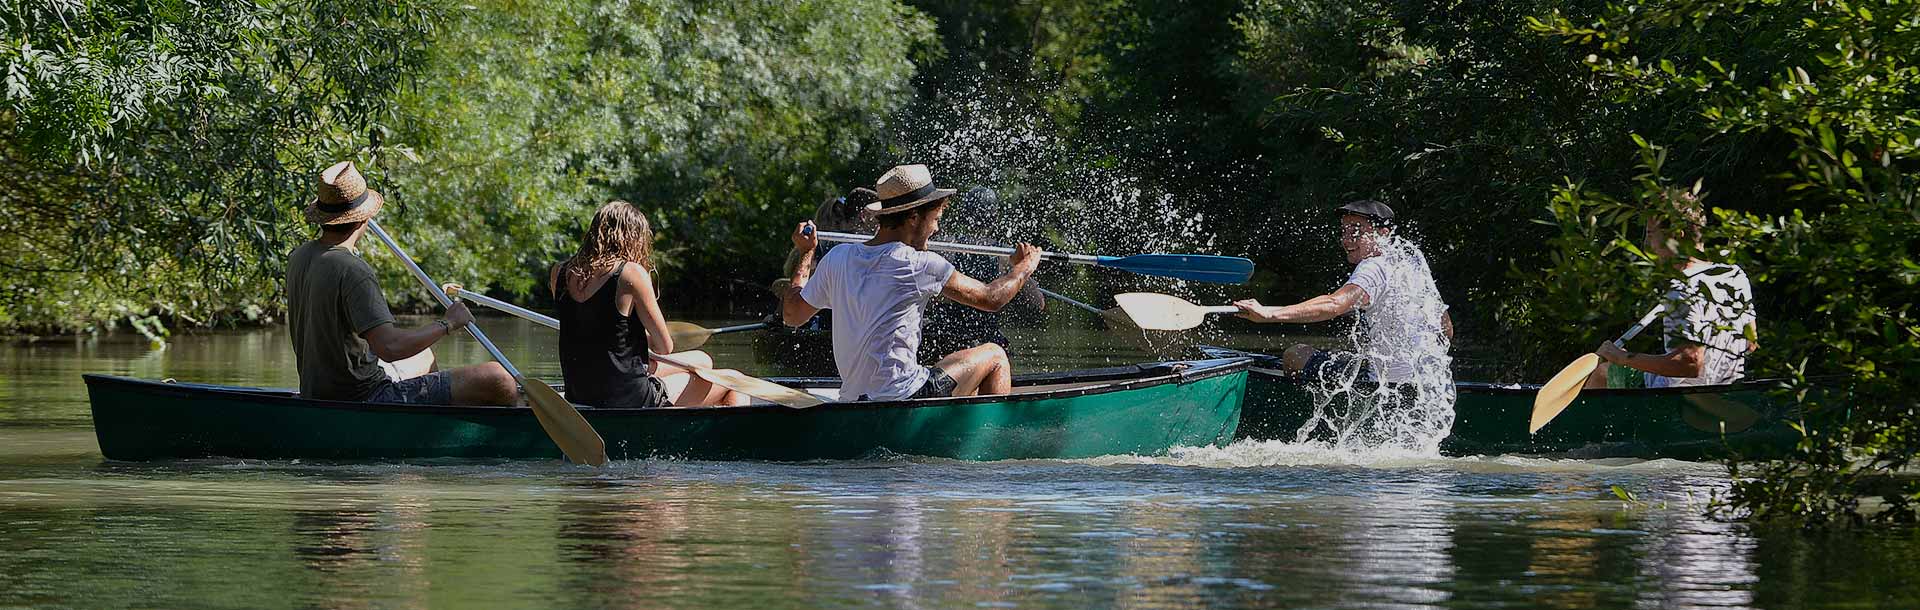 12 things to do in the Marais poitevin in Summer